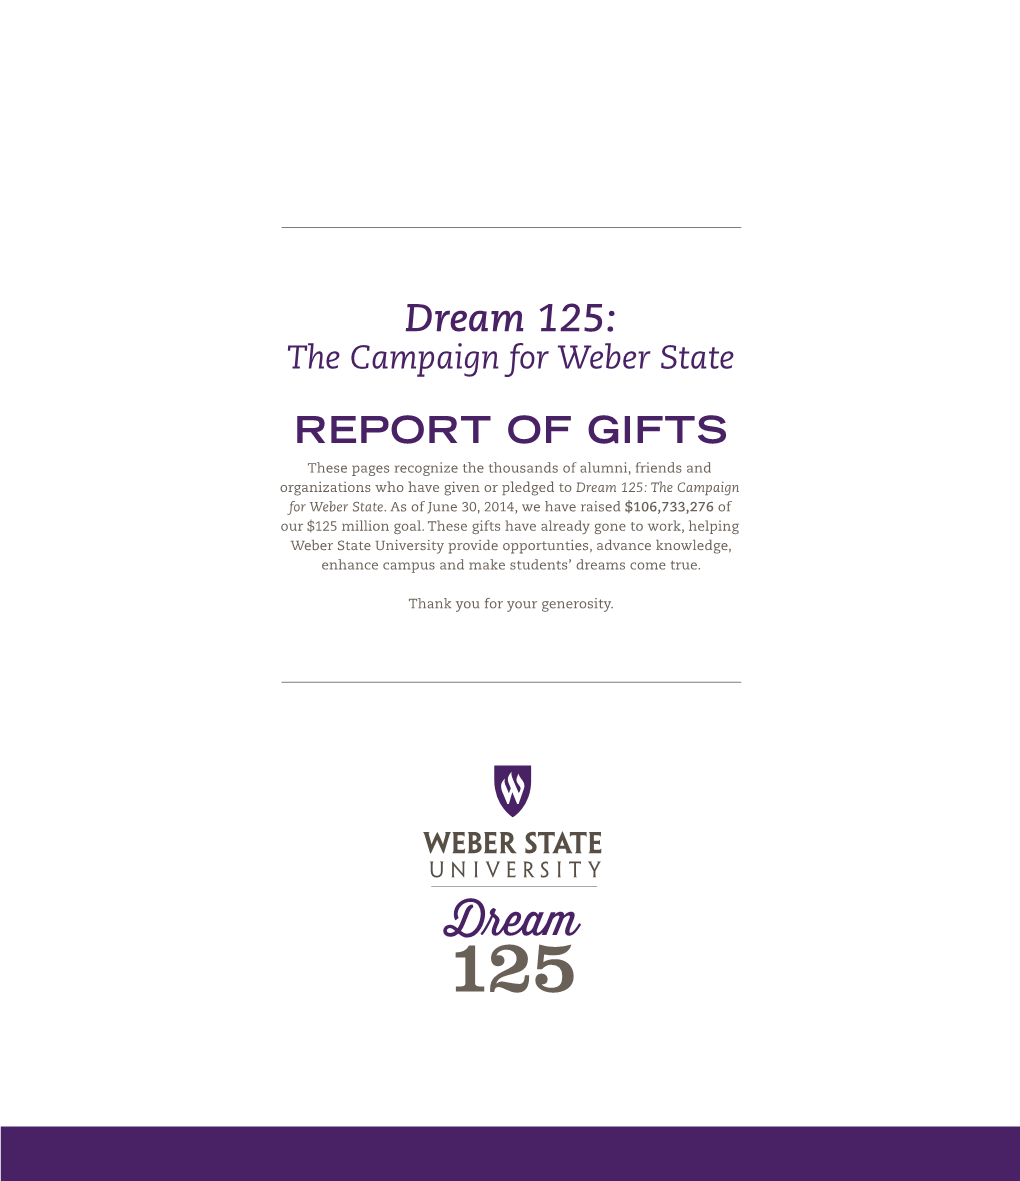 Dream 125: the Campaign for Weber State